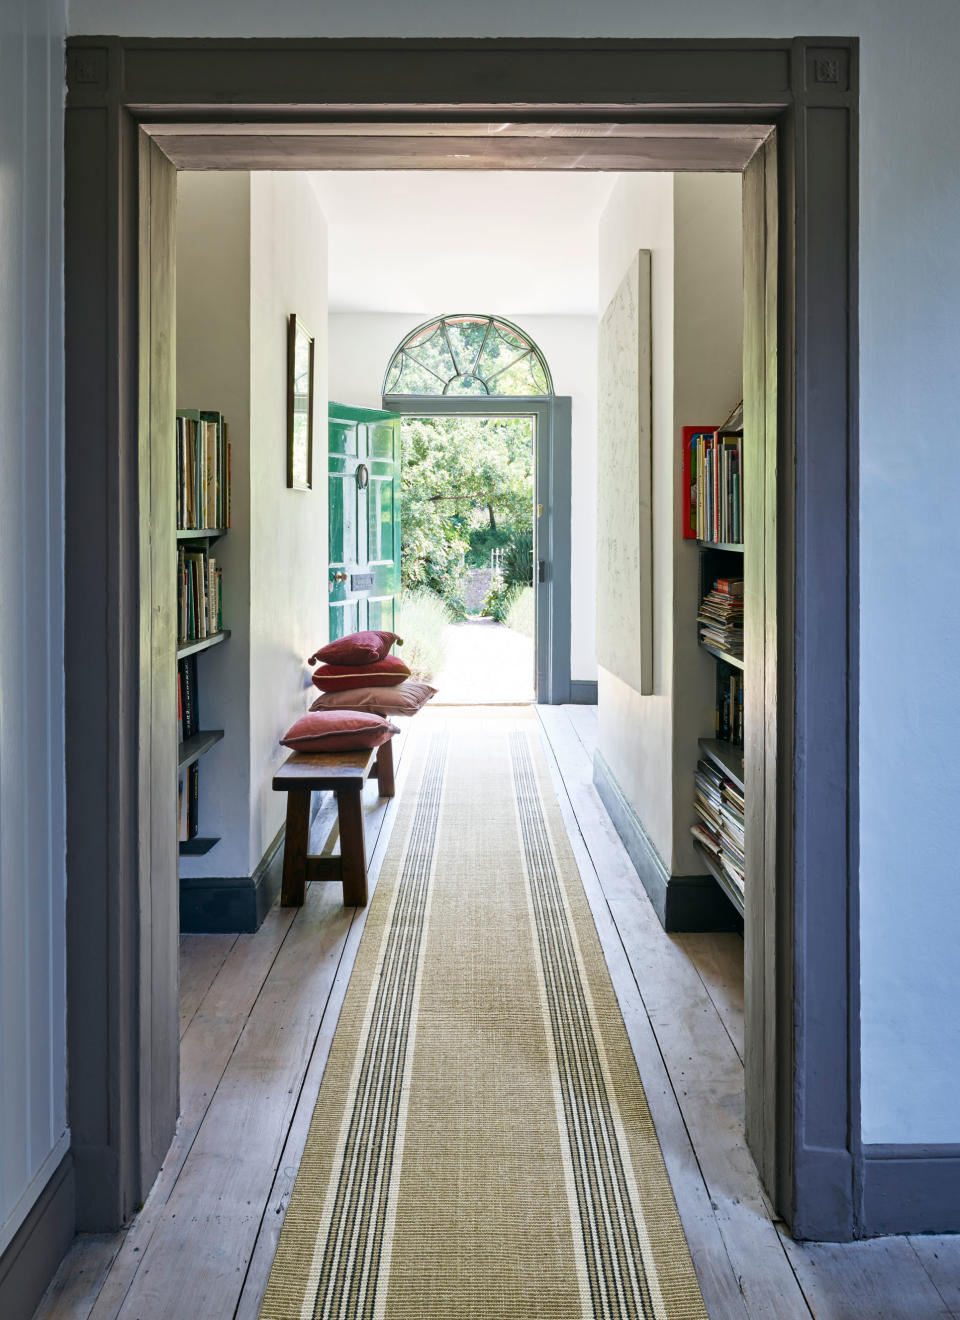 <p> Opt for&#xA0;hallway runner ideas&#xA0;to add color and pattern to the hall and lead the eye up and down the space. It can reduce noise, too. </p> <p> Note the books and pictures in this space &#x2013; even&#xA0;small hallways&#xA0;can be furnished to feel like a room, not a thoroughfare, to make them feel far more welcoming.&#xA0; </p>